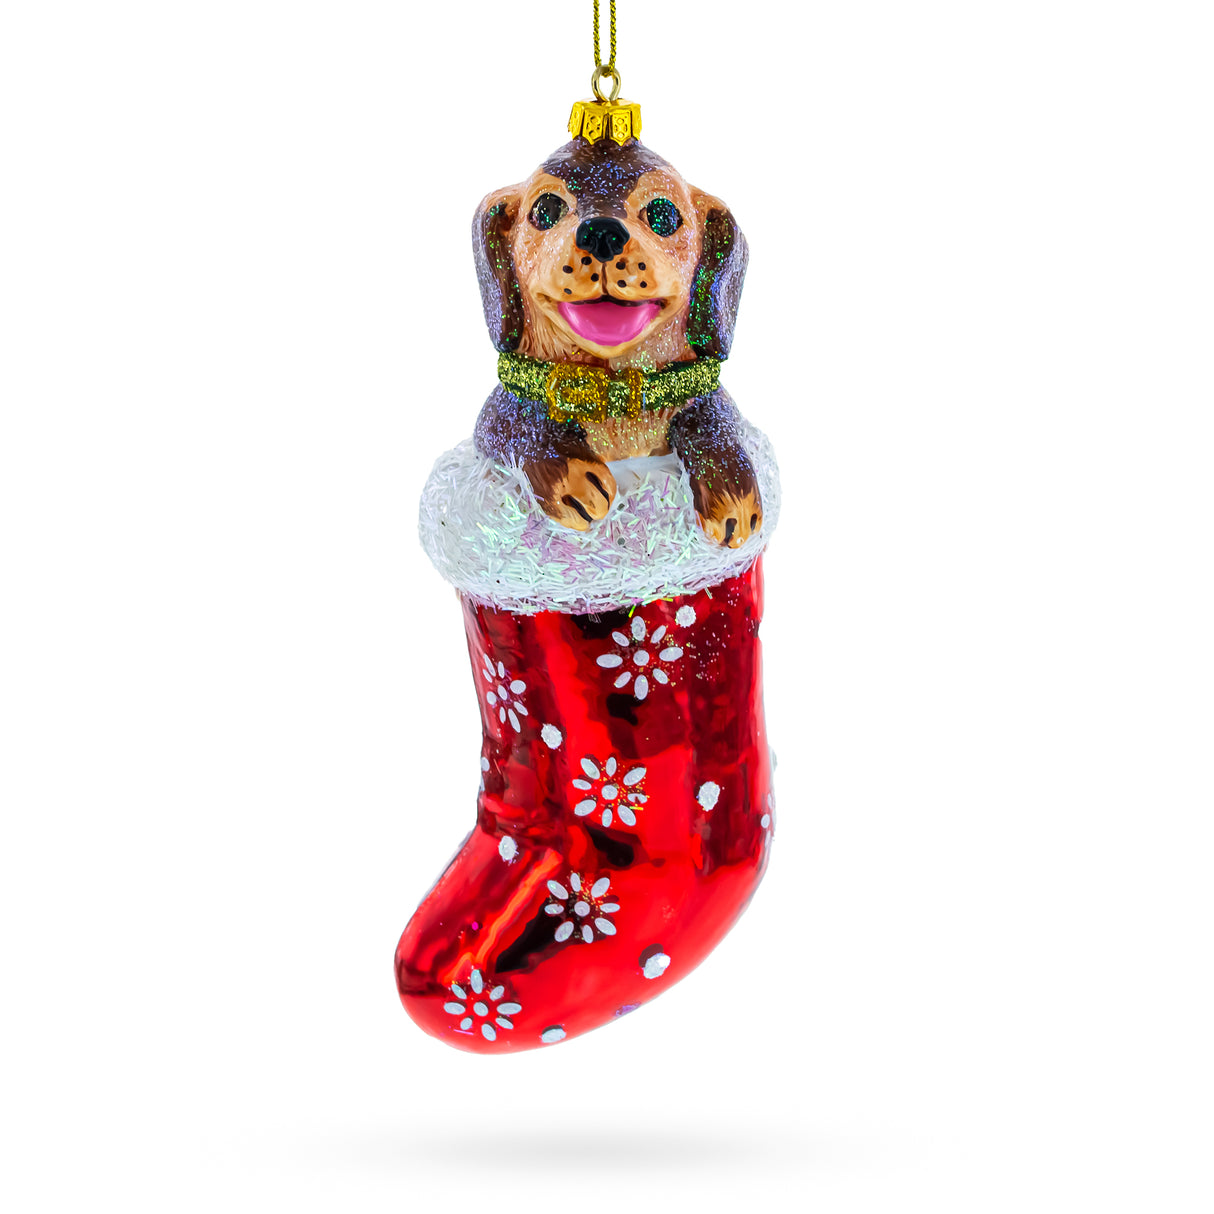 Joyful Puppy Nestled in Red Christmas Stocking -  High-Quality Blown Glass Christmas Ornament in Red color,  shape